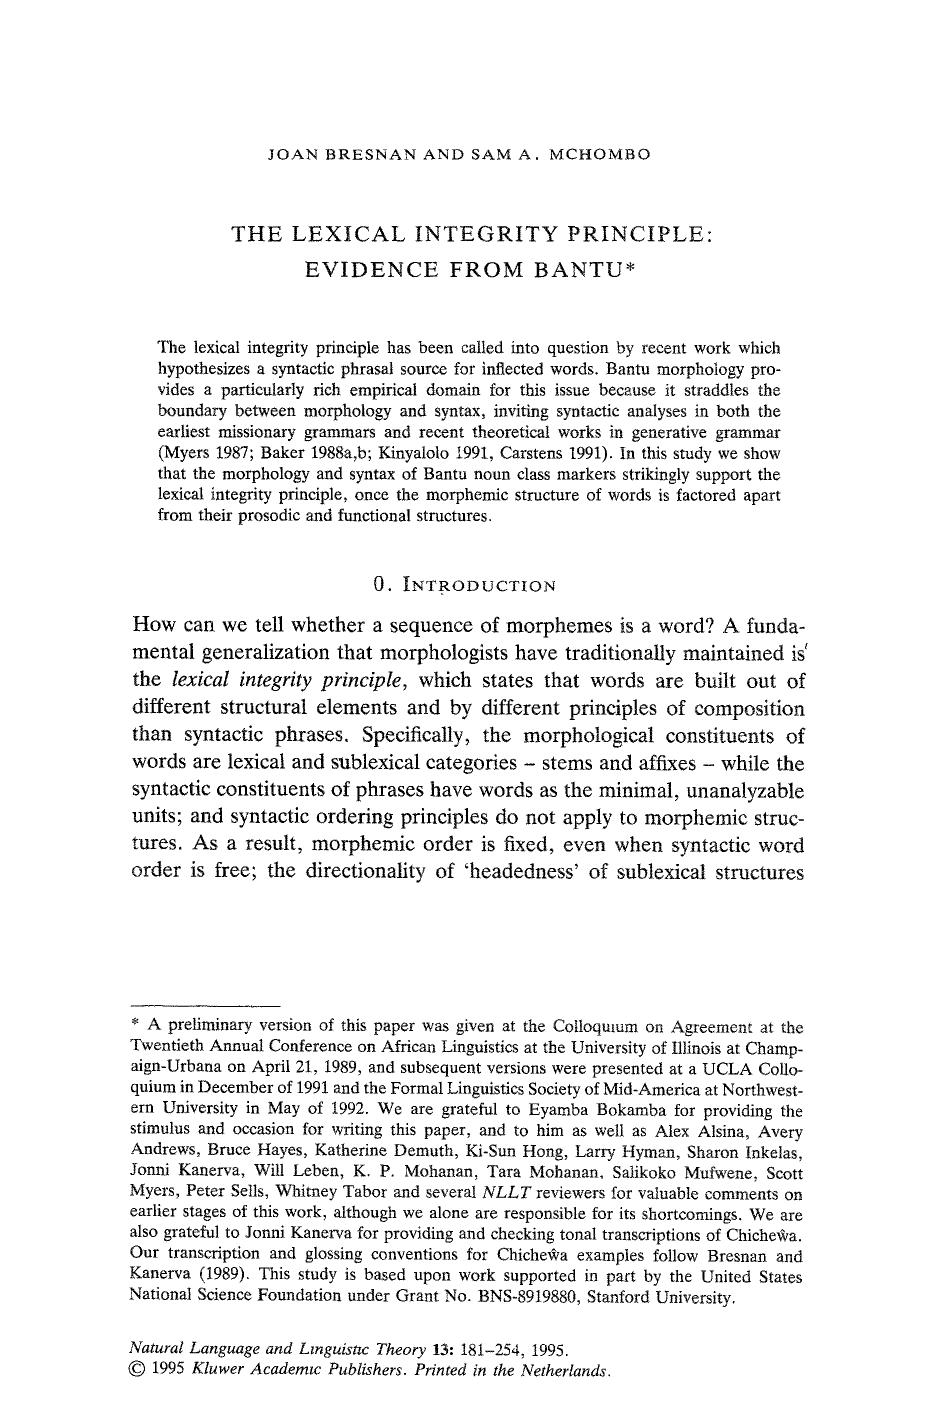 The lexical integrity principle: Evidence from Bantu - Paper